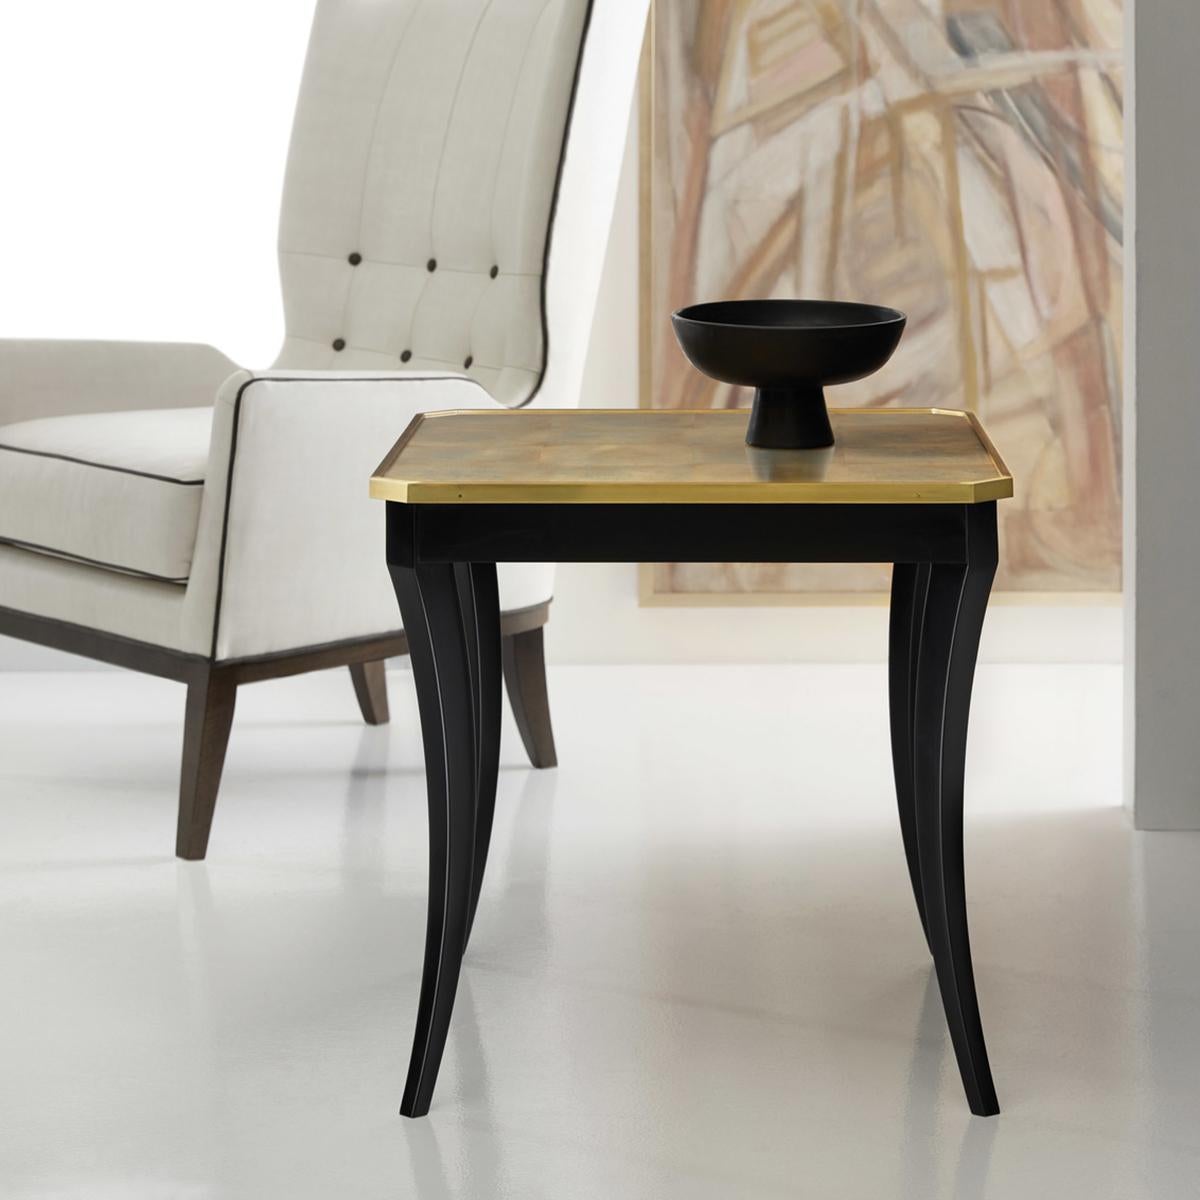 Discover a perfect blend of elegance and functionality with our chic square end table, where classic style meets contemporary flair with our magnificent glass-top golden eglomise finish.

The square gold top with brass trim is beautifully contrasted